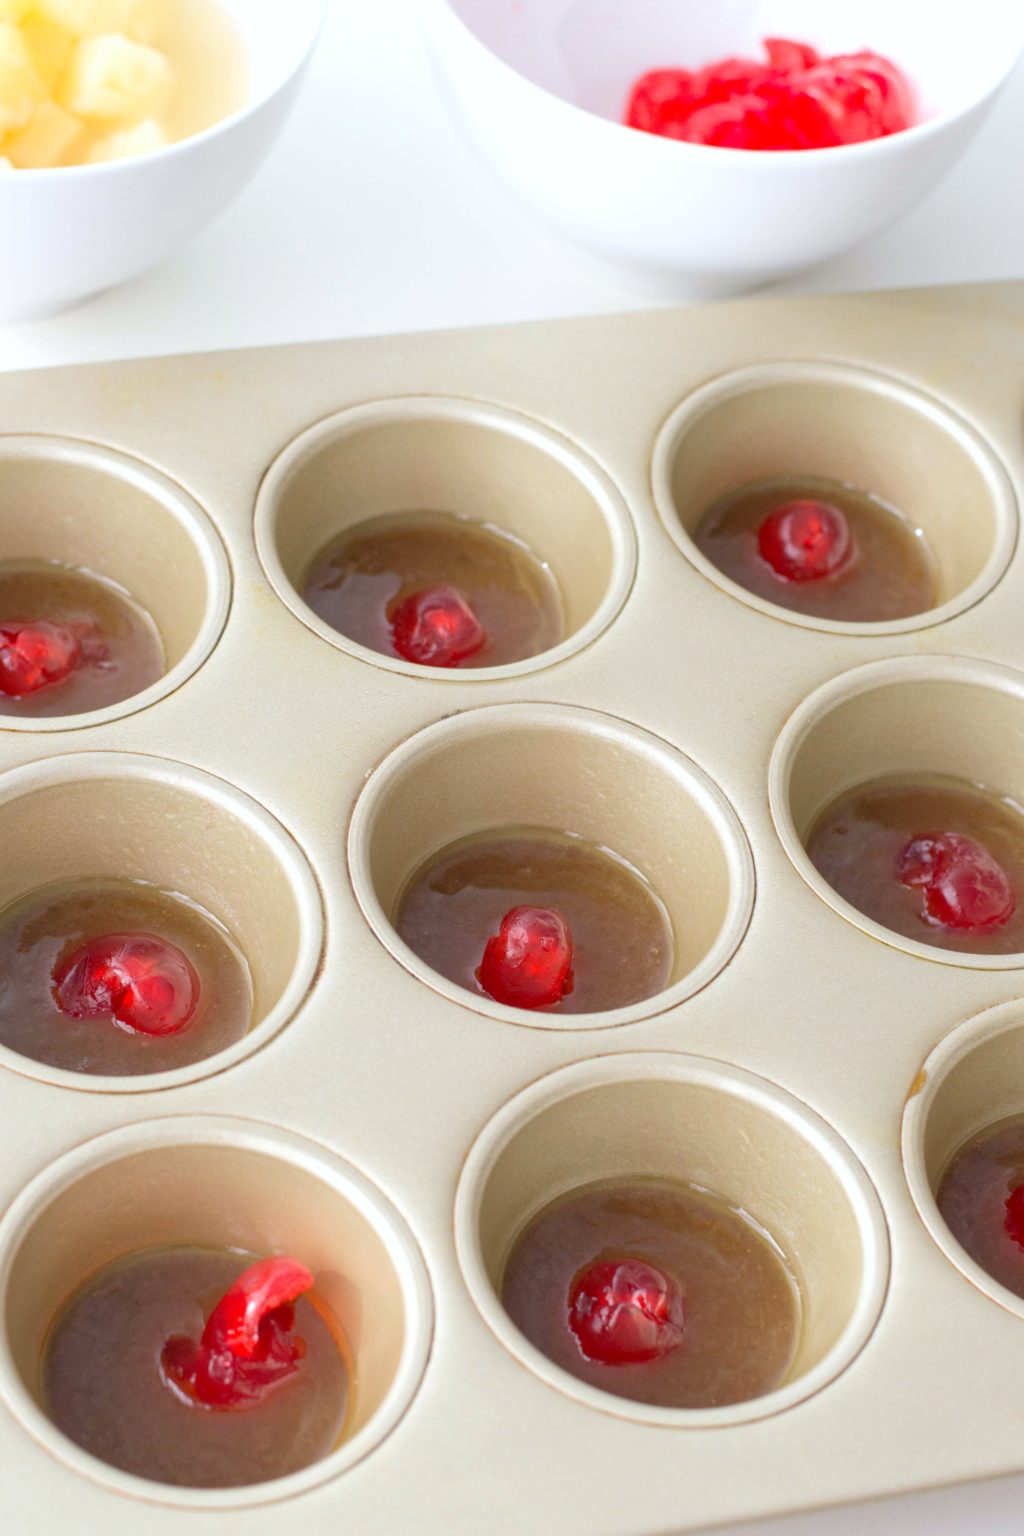 Add butter and sugar mixture to tins and then place maraschino cherry to the middle of muffin tin. 